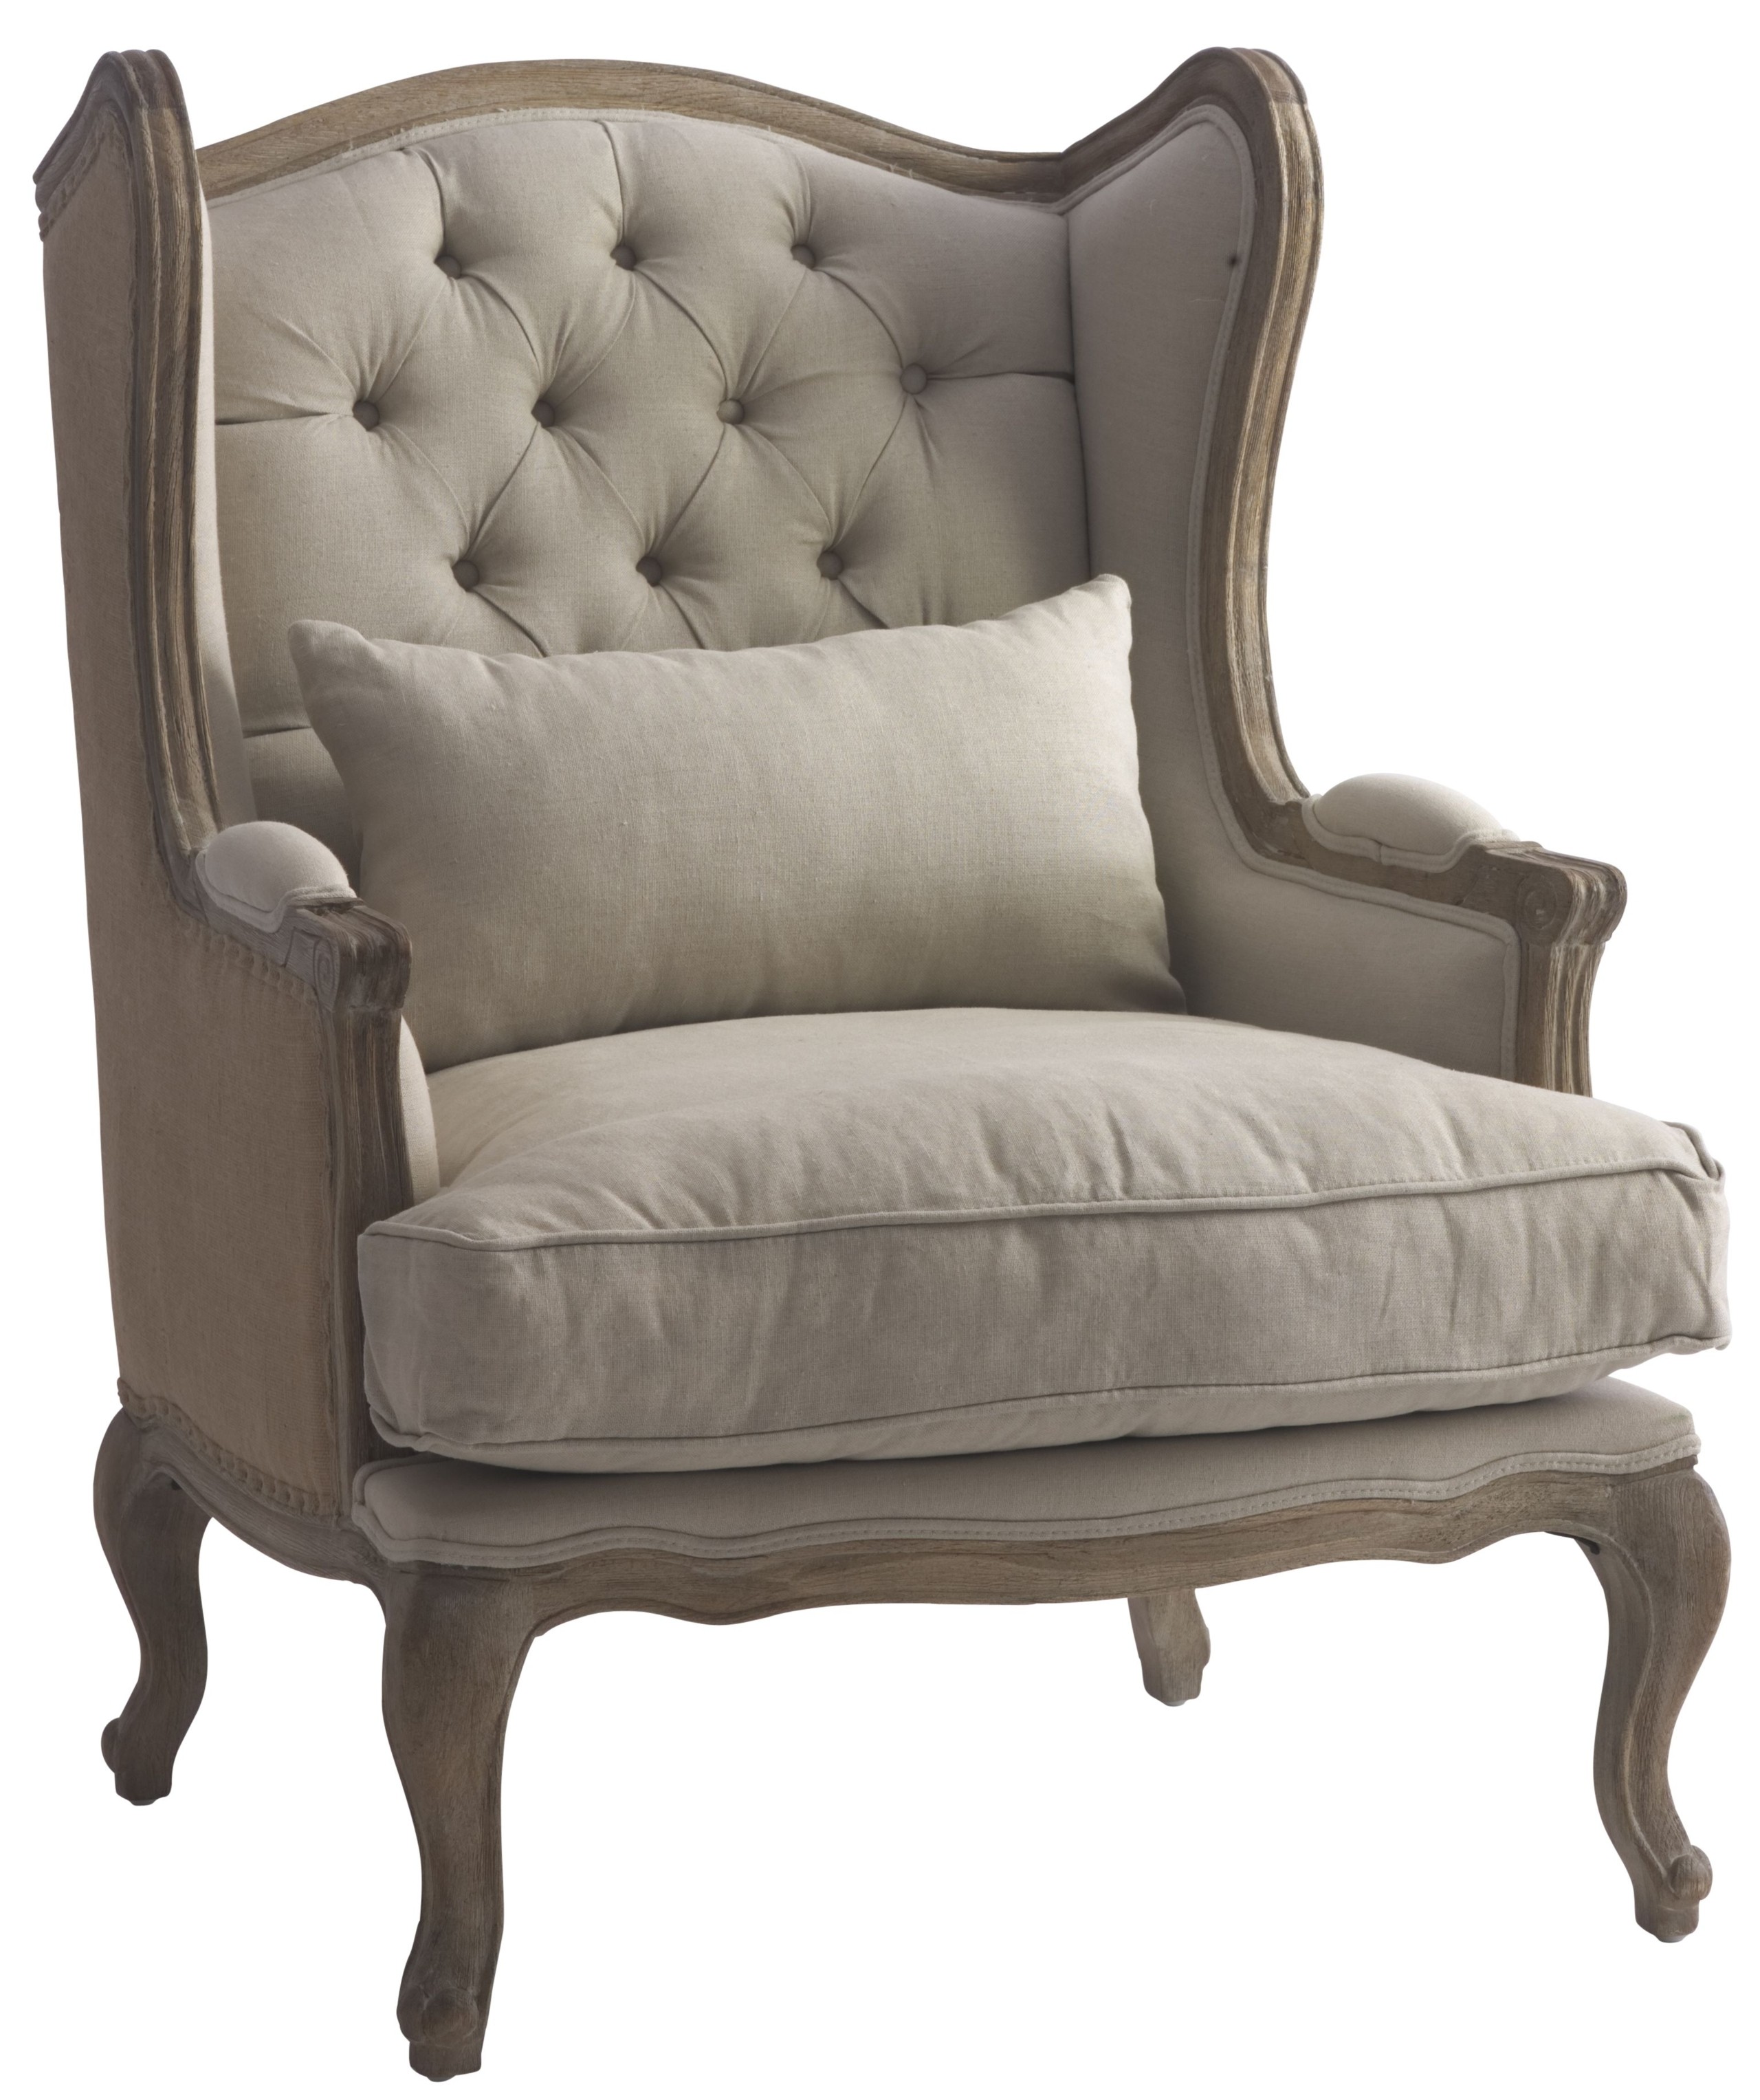 White french armchair